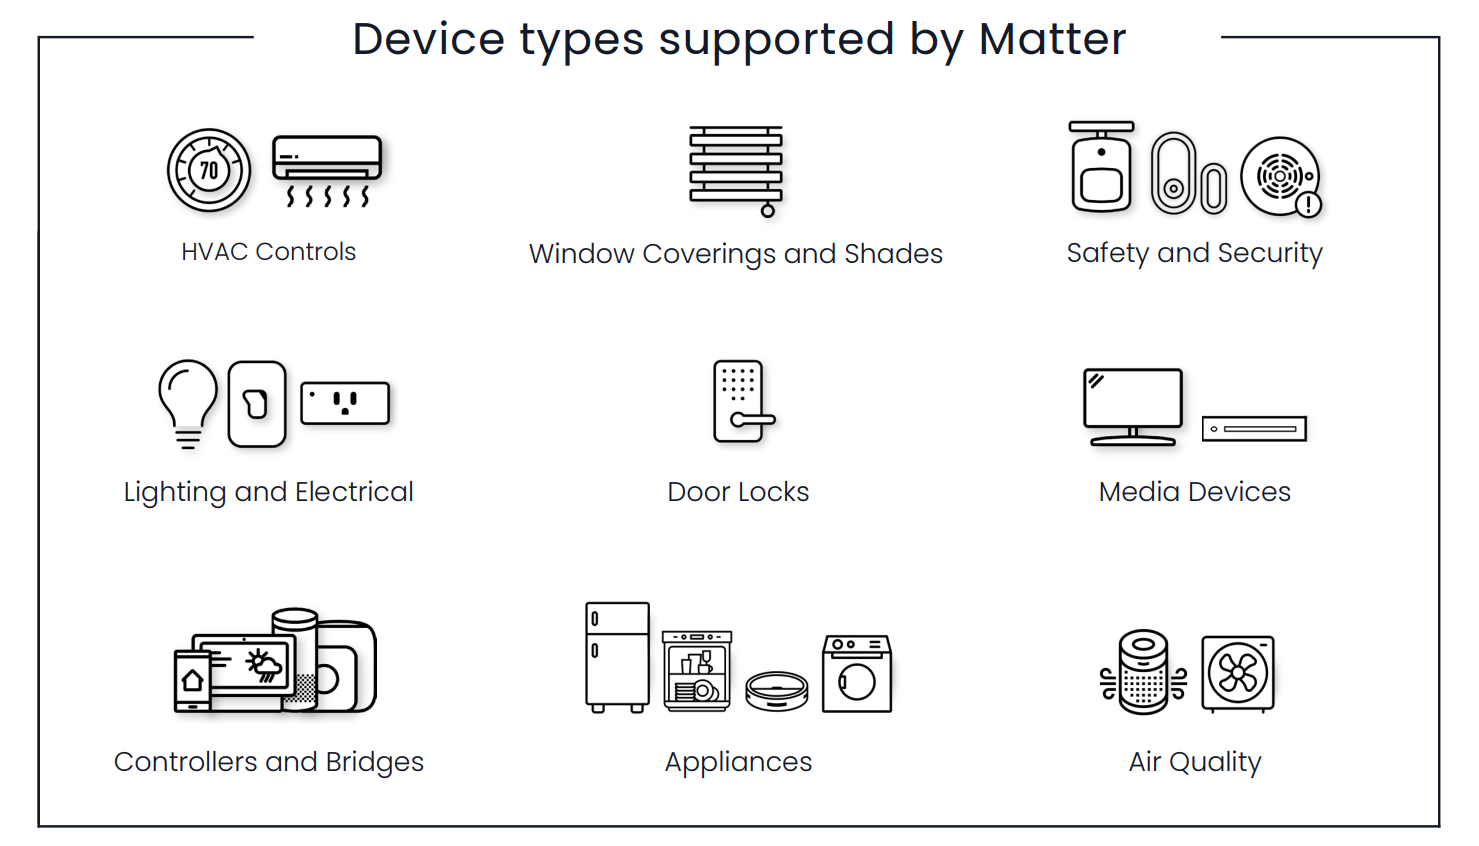 Device types suppordted by Matter